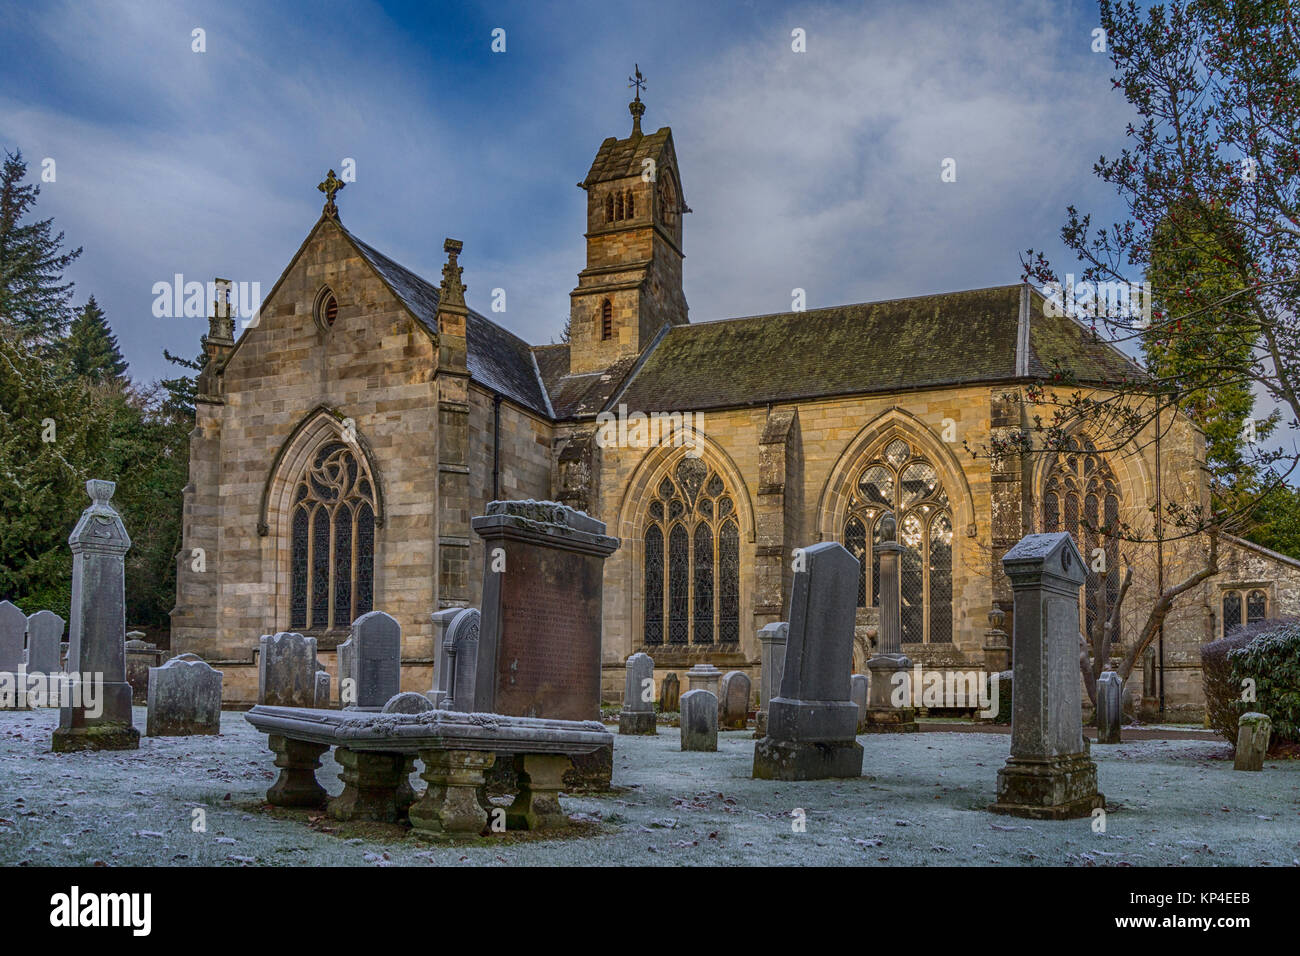 The historic Kirk of Calder, in the conservation village of Mid Calder, West Lothian, Scotland, dates from 1541 Stock Photo